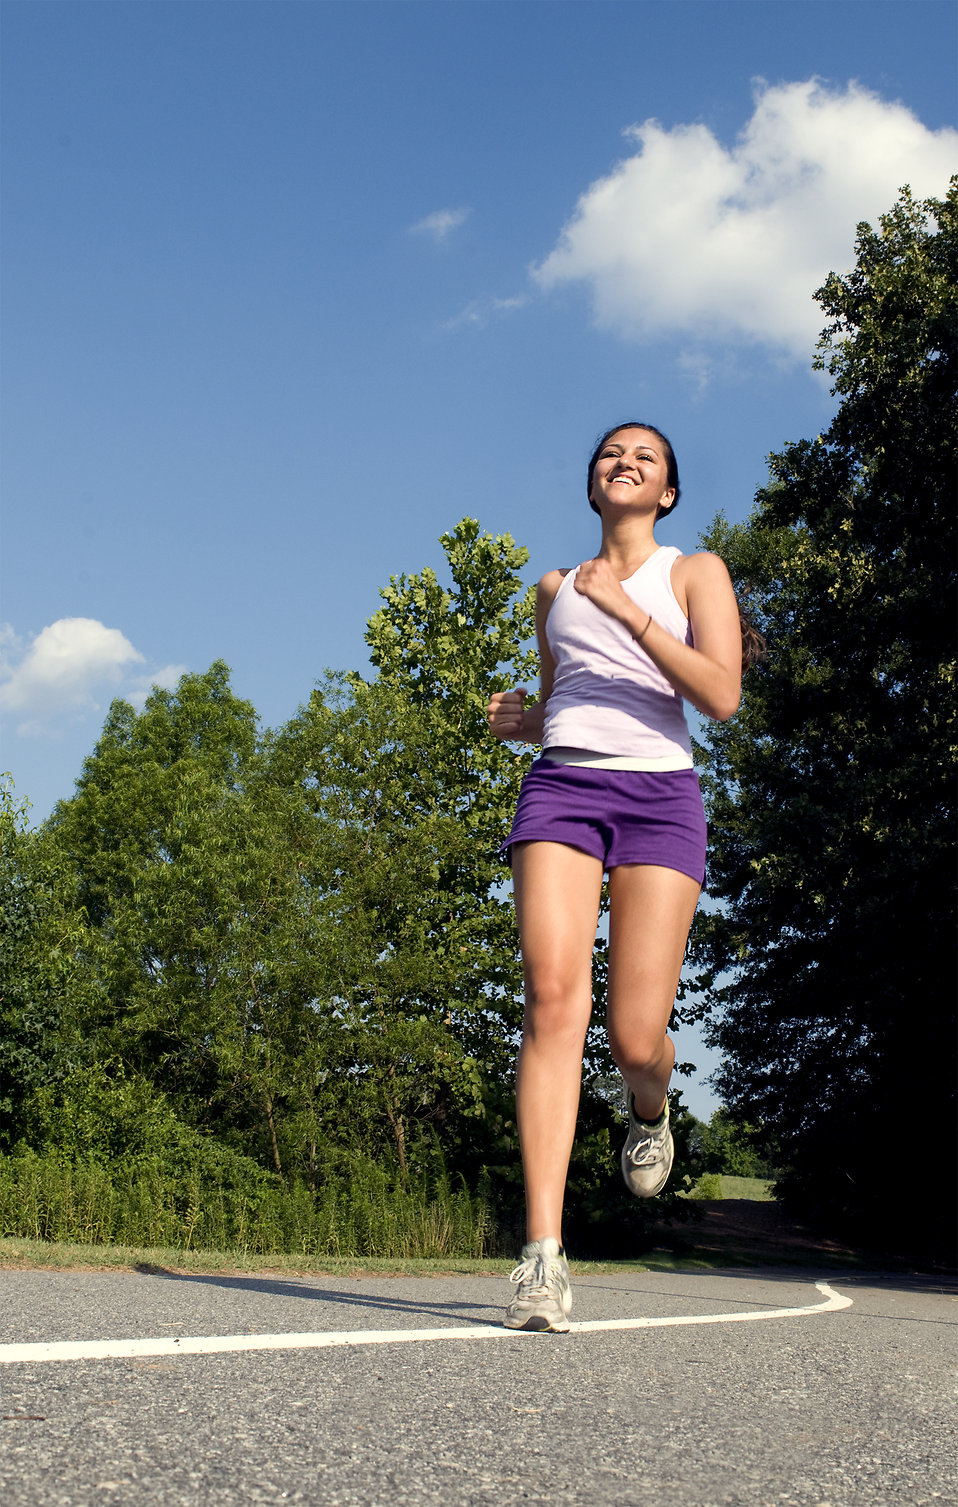 15256-a-young-woman-jogging-outdoors-pv